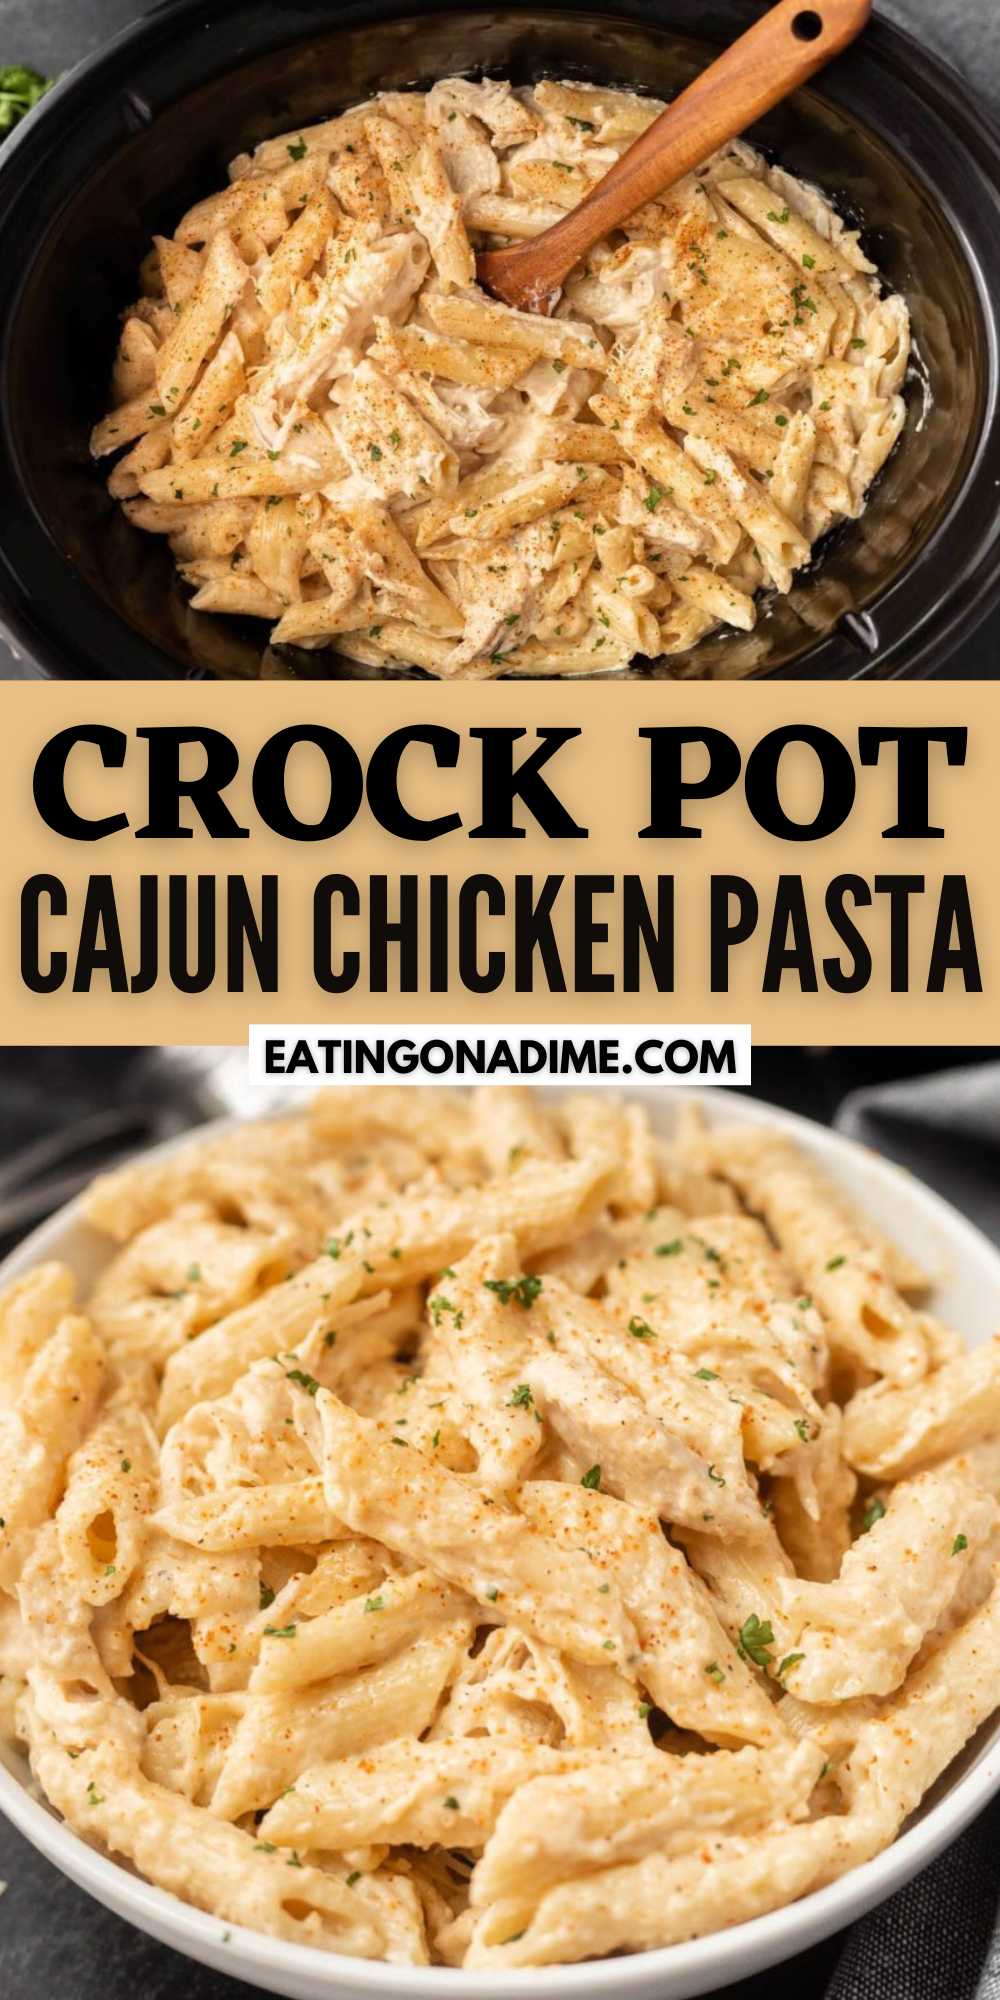 Crock Pot Cajun Chicken Pasta Recipe is creamy and delicious with a little bit of heat. The Cajun flavor jazzes up this chicken dish. Change up your pasta recipe and make this Cajun Chicken pasta in your slow cooker. Add a side salad and some garlic bread for a complete meal idea. #eatingonadime #crockpotcajunchickenpasta #cajunchickenpasta